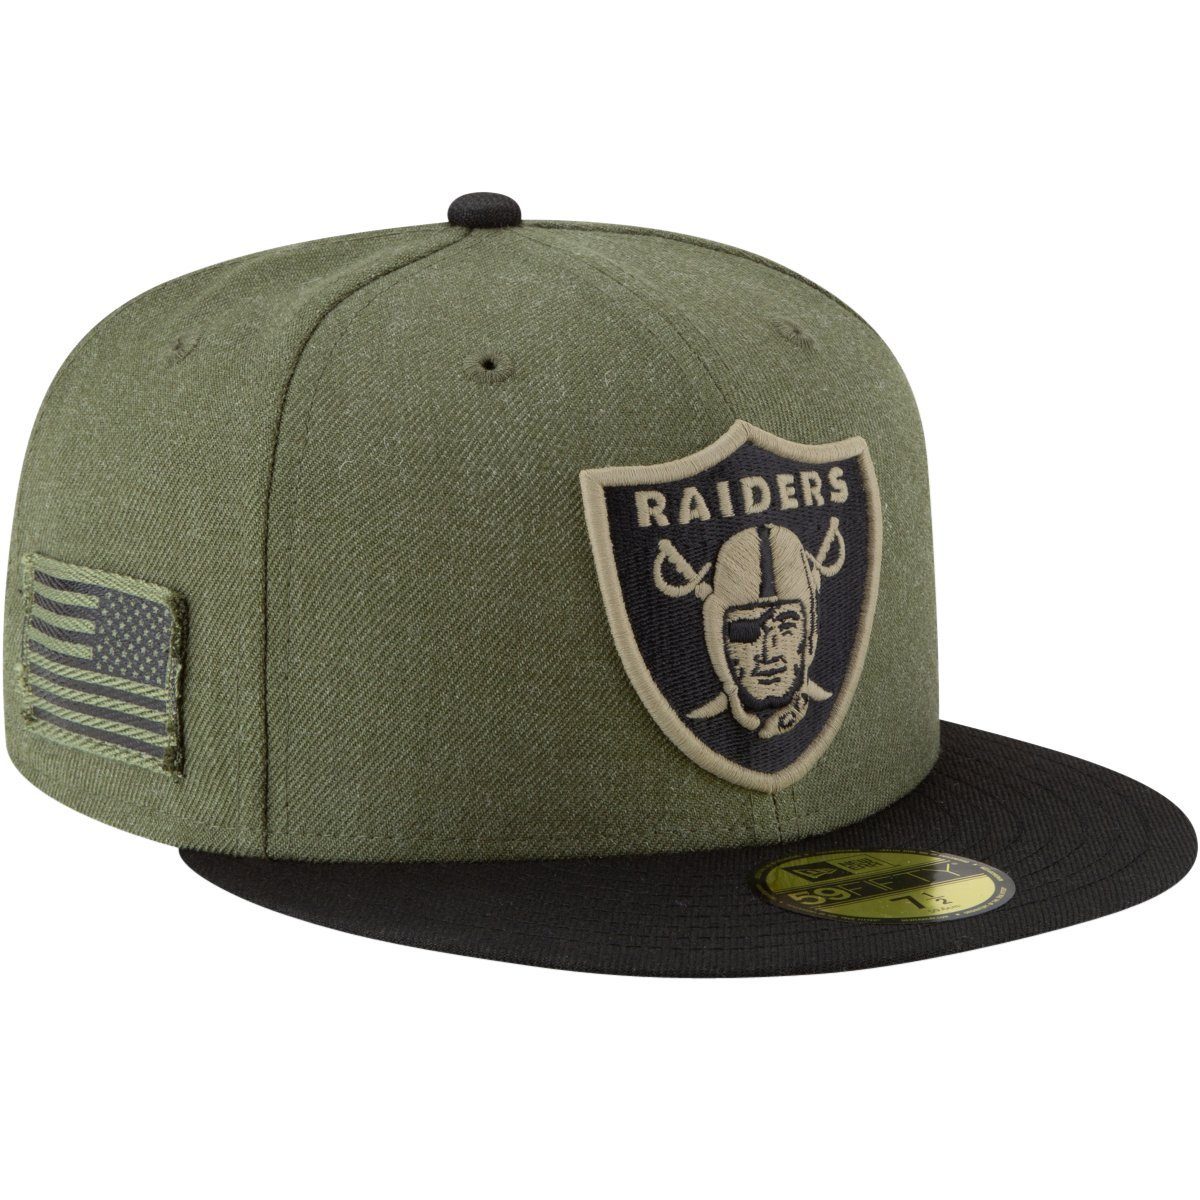 Service New Era Fitted Cap Oakland to Salute NFL Raiders 59Fifty